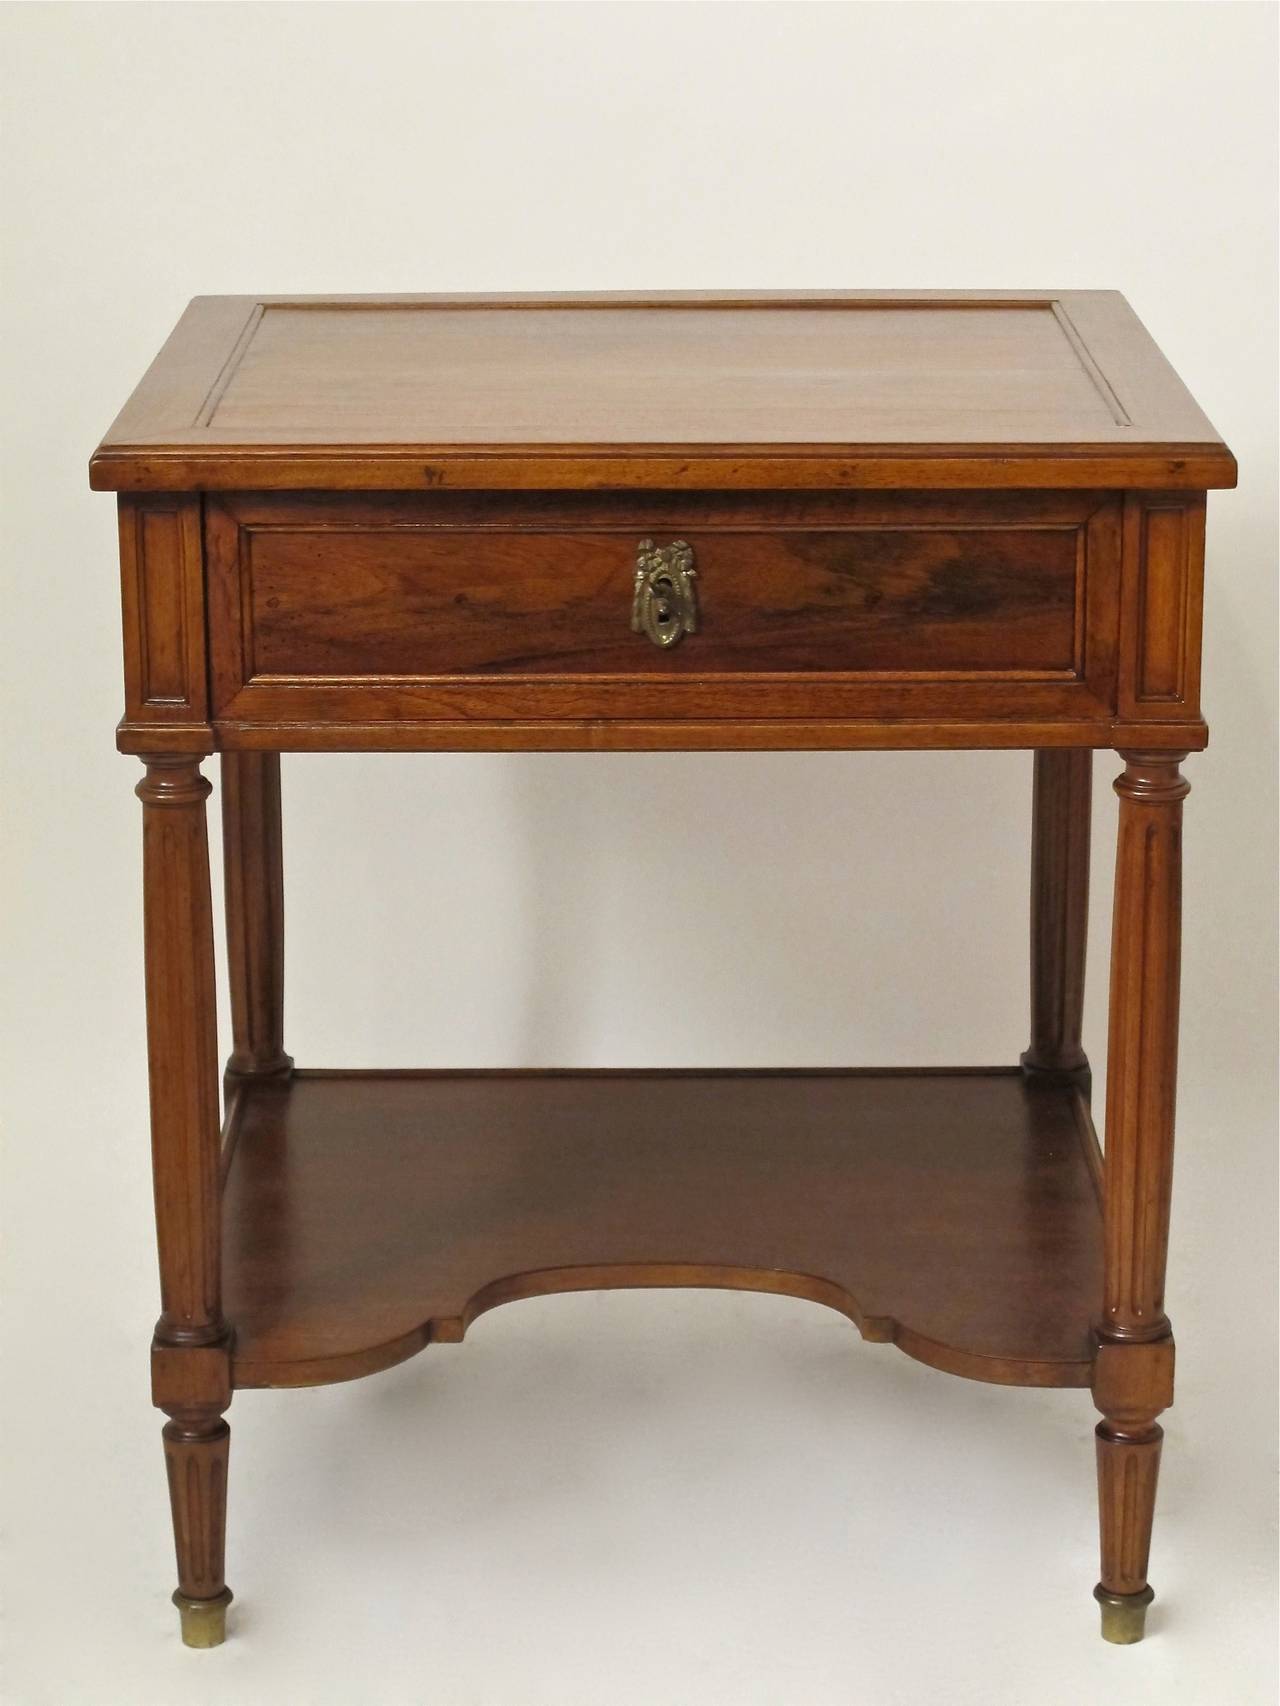 A 19th century Louis XVI style side/bedside table with a recessed panel top above a single drawer (with key) and tapering fluted legs ending in brass sabots. Quality bench made walnut table with very nice detailing on all four sides.